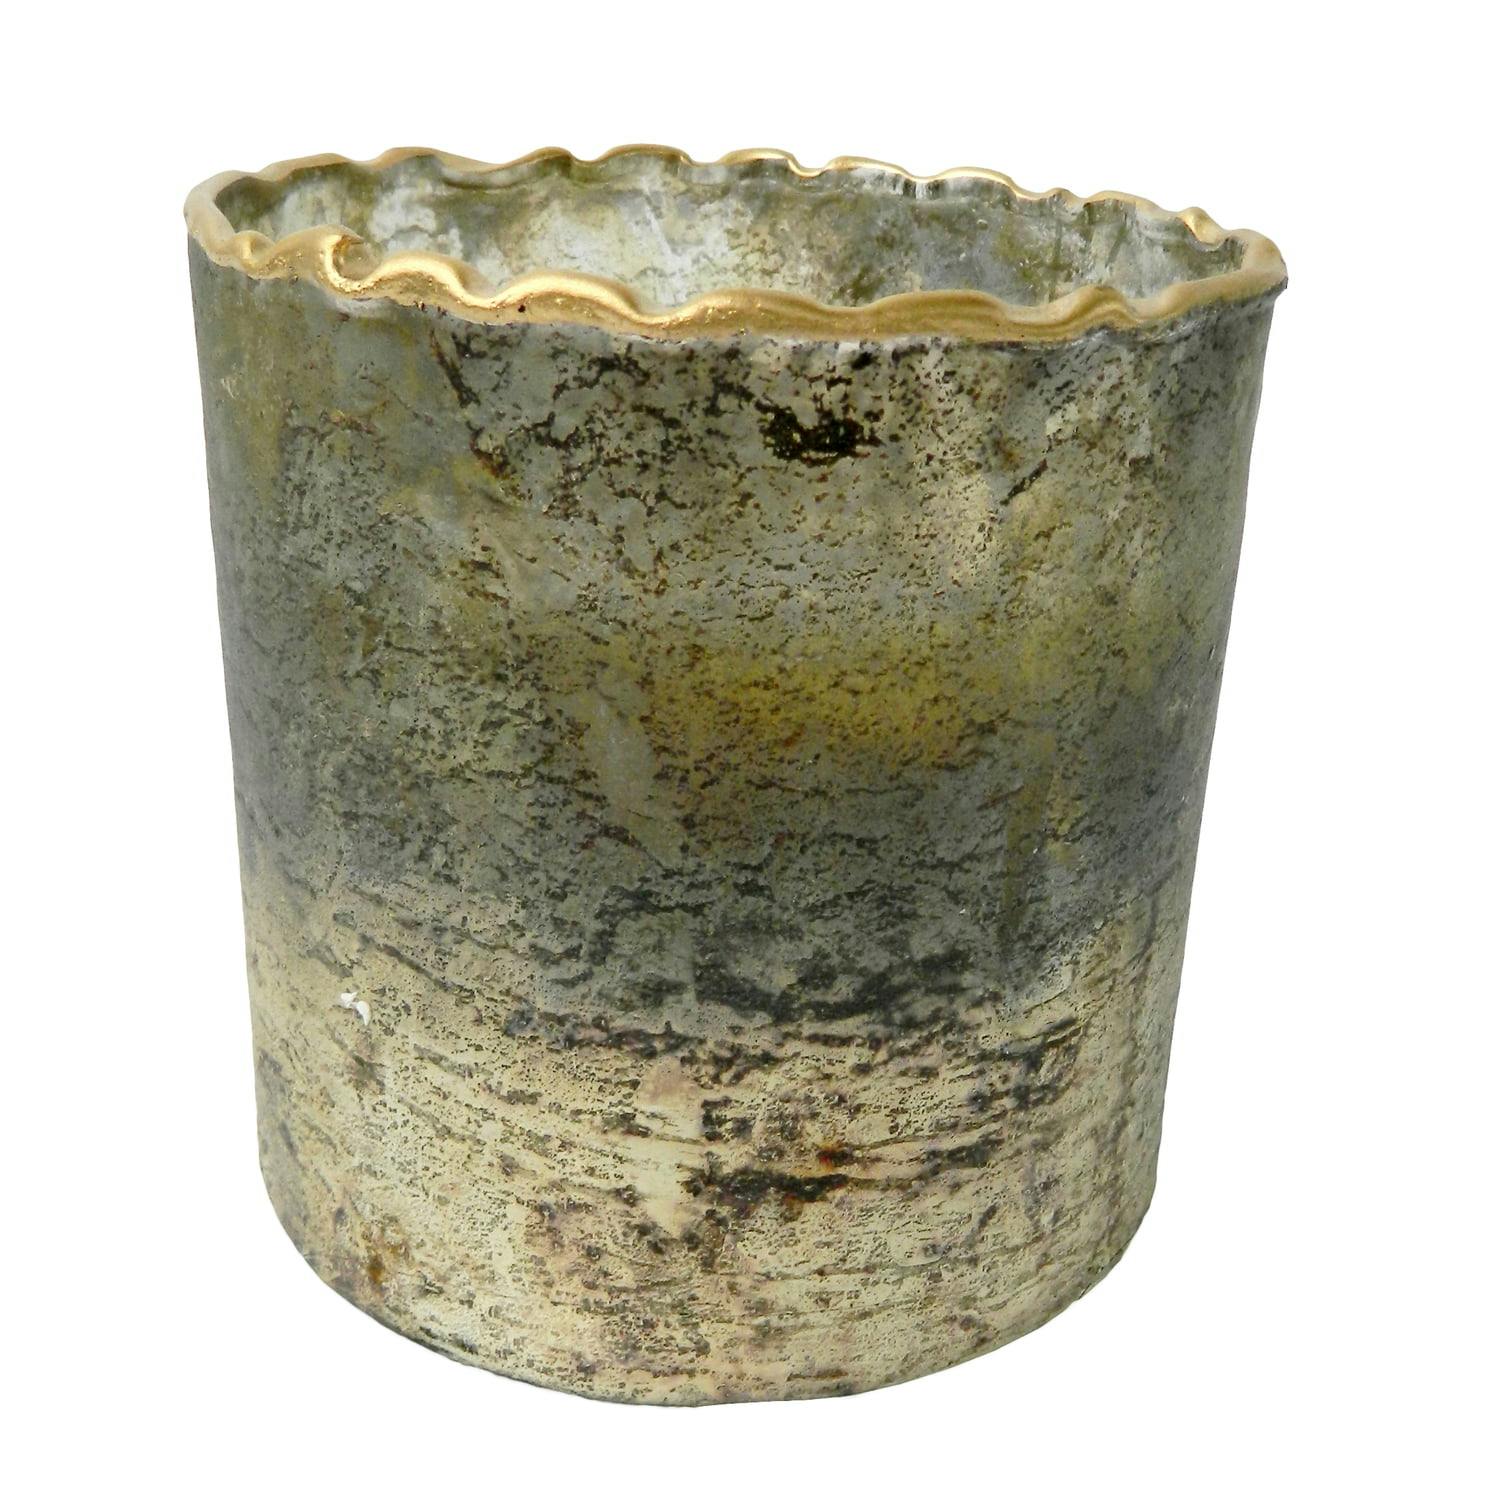 Earl Grey Scented Soy Wax Candle in Textured Brown Glass